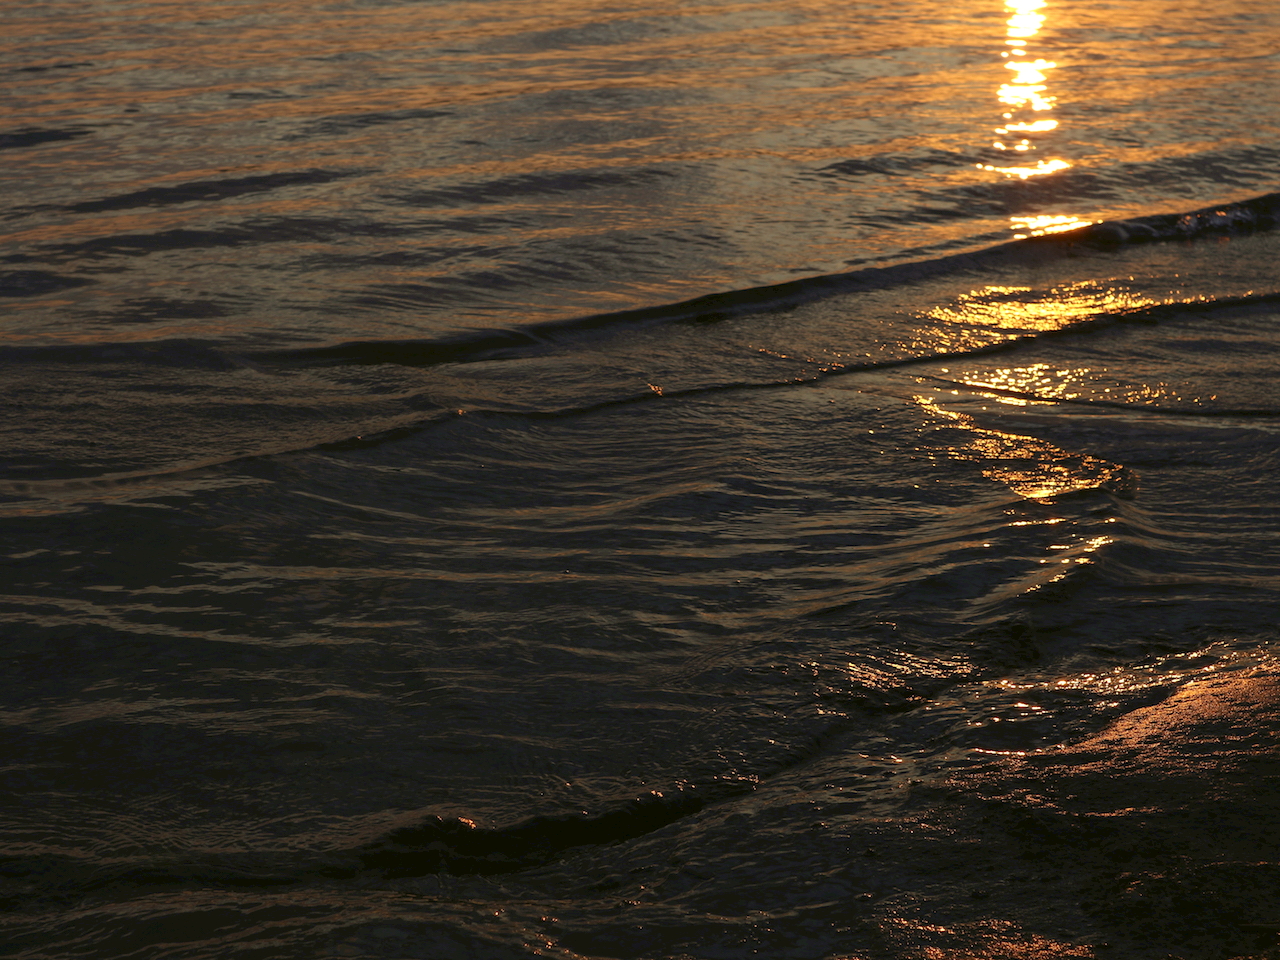 The Runner-Up of the Diamond category: “Sunset Waves” by Kendra Levere of Glen Bernard Camp, Age 14.